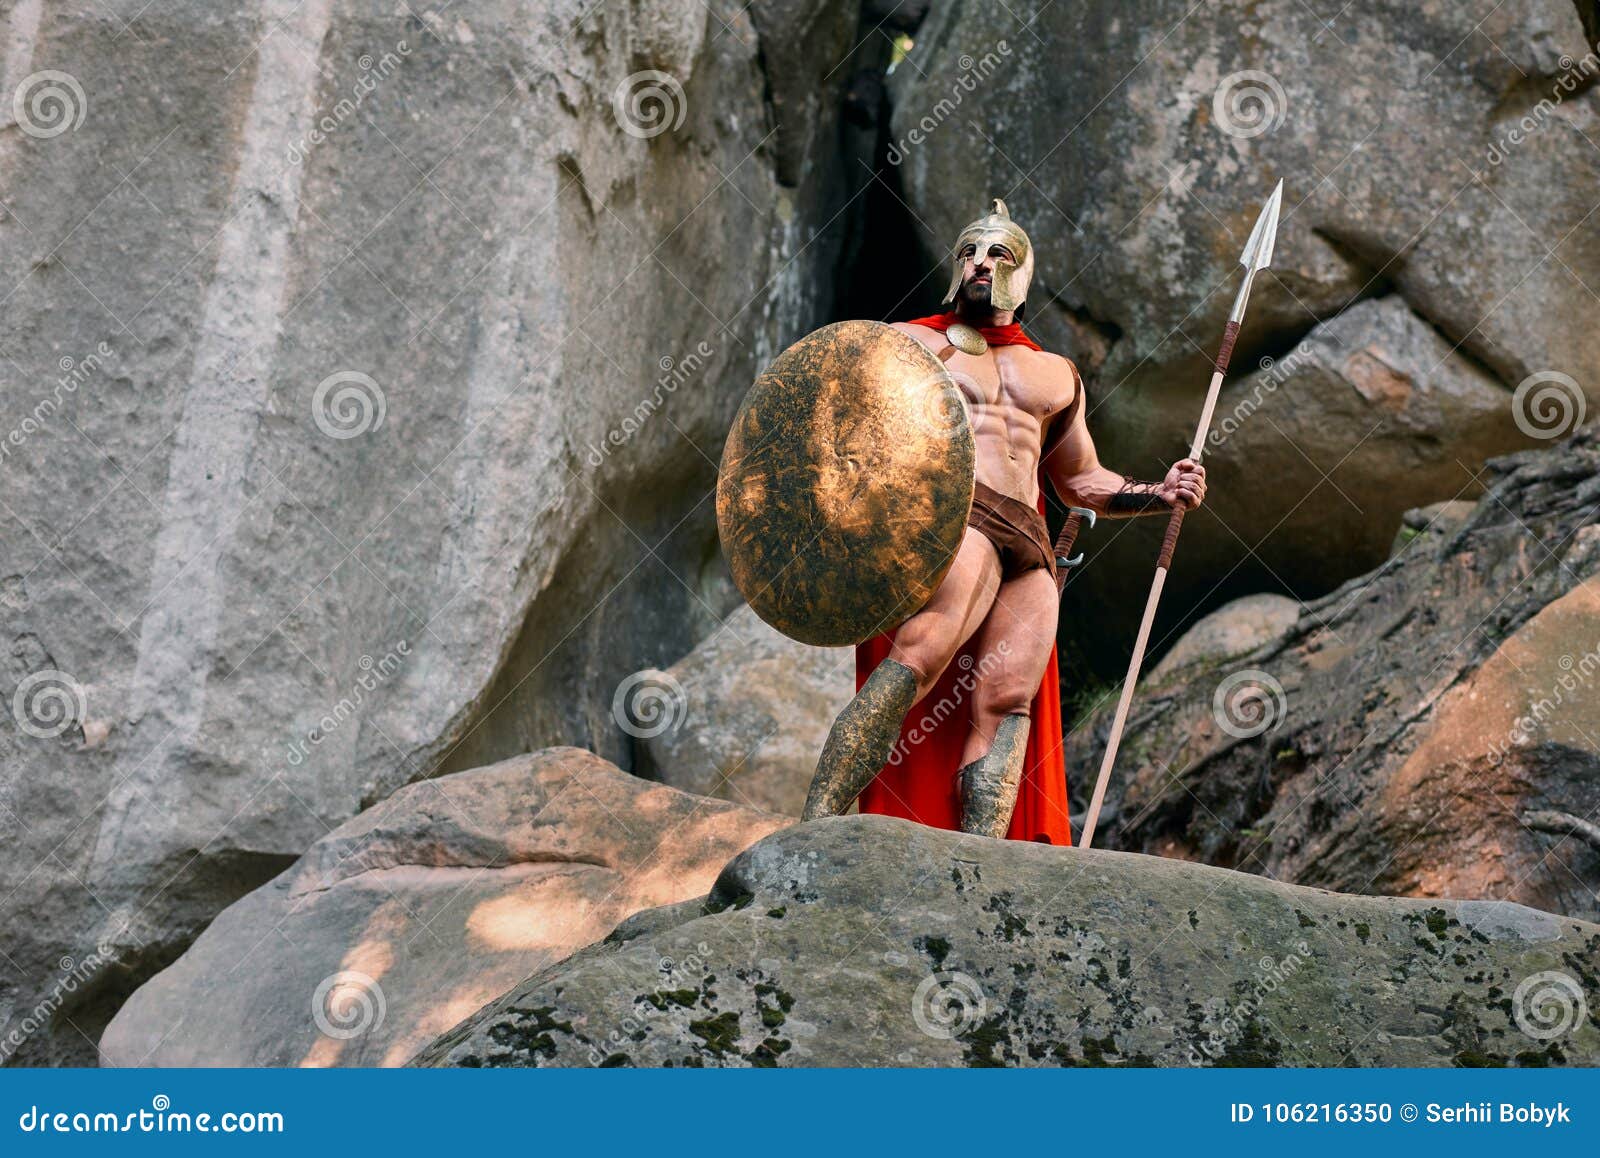 Mature Spartan Warrior in the Woods Stock Photo - Image of armor,  masculine: 106216350